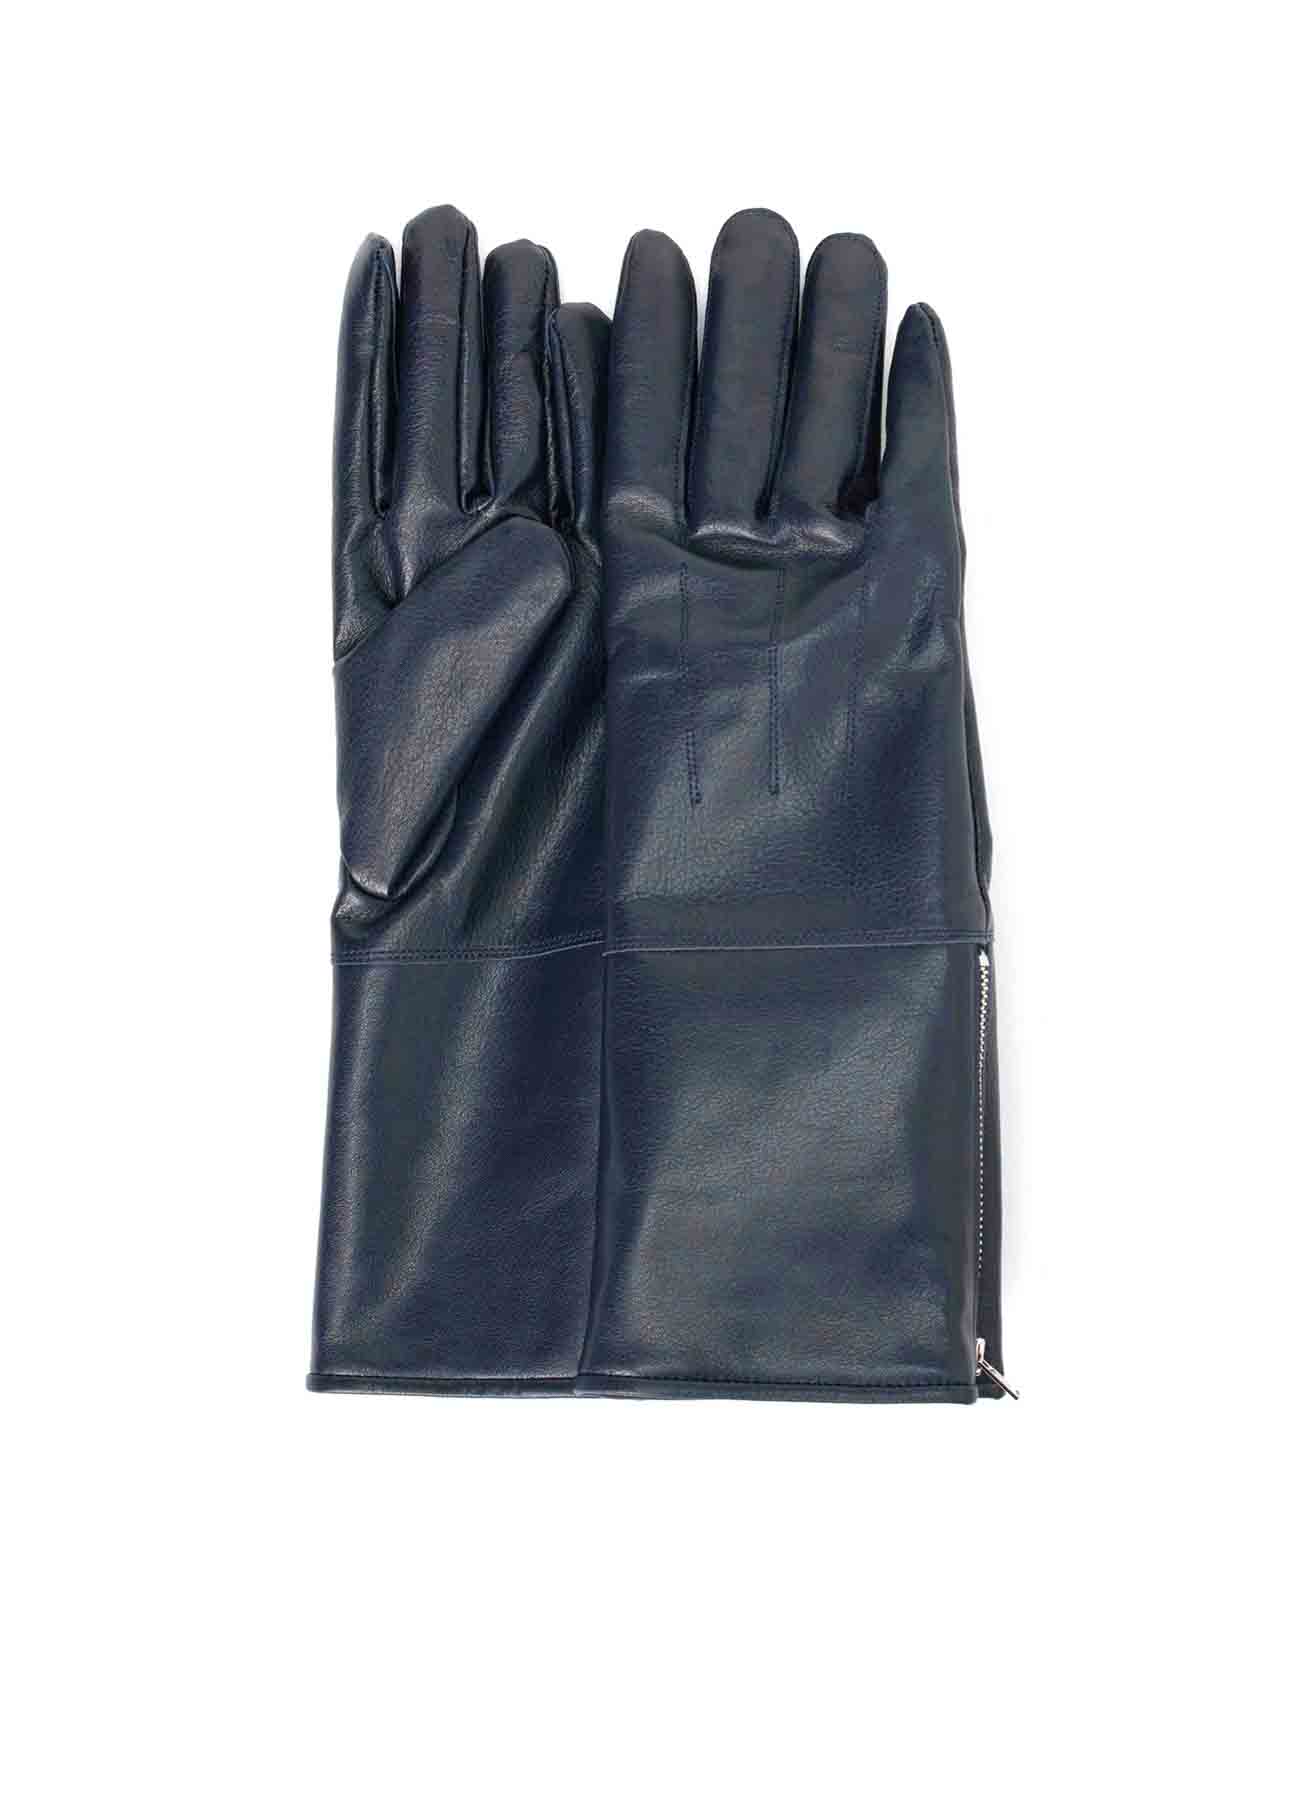 SOFT LEATHER RIDING GLOVES